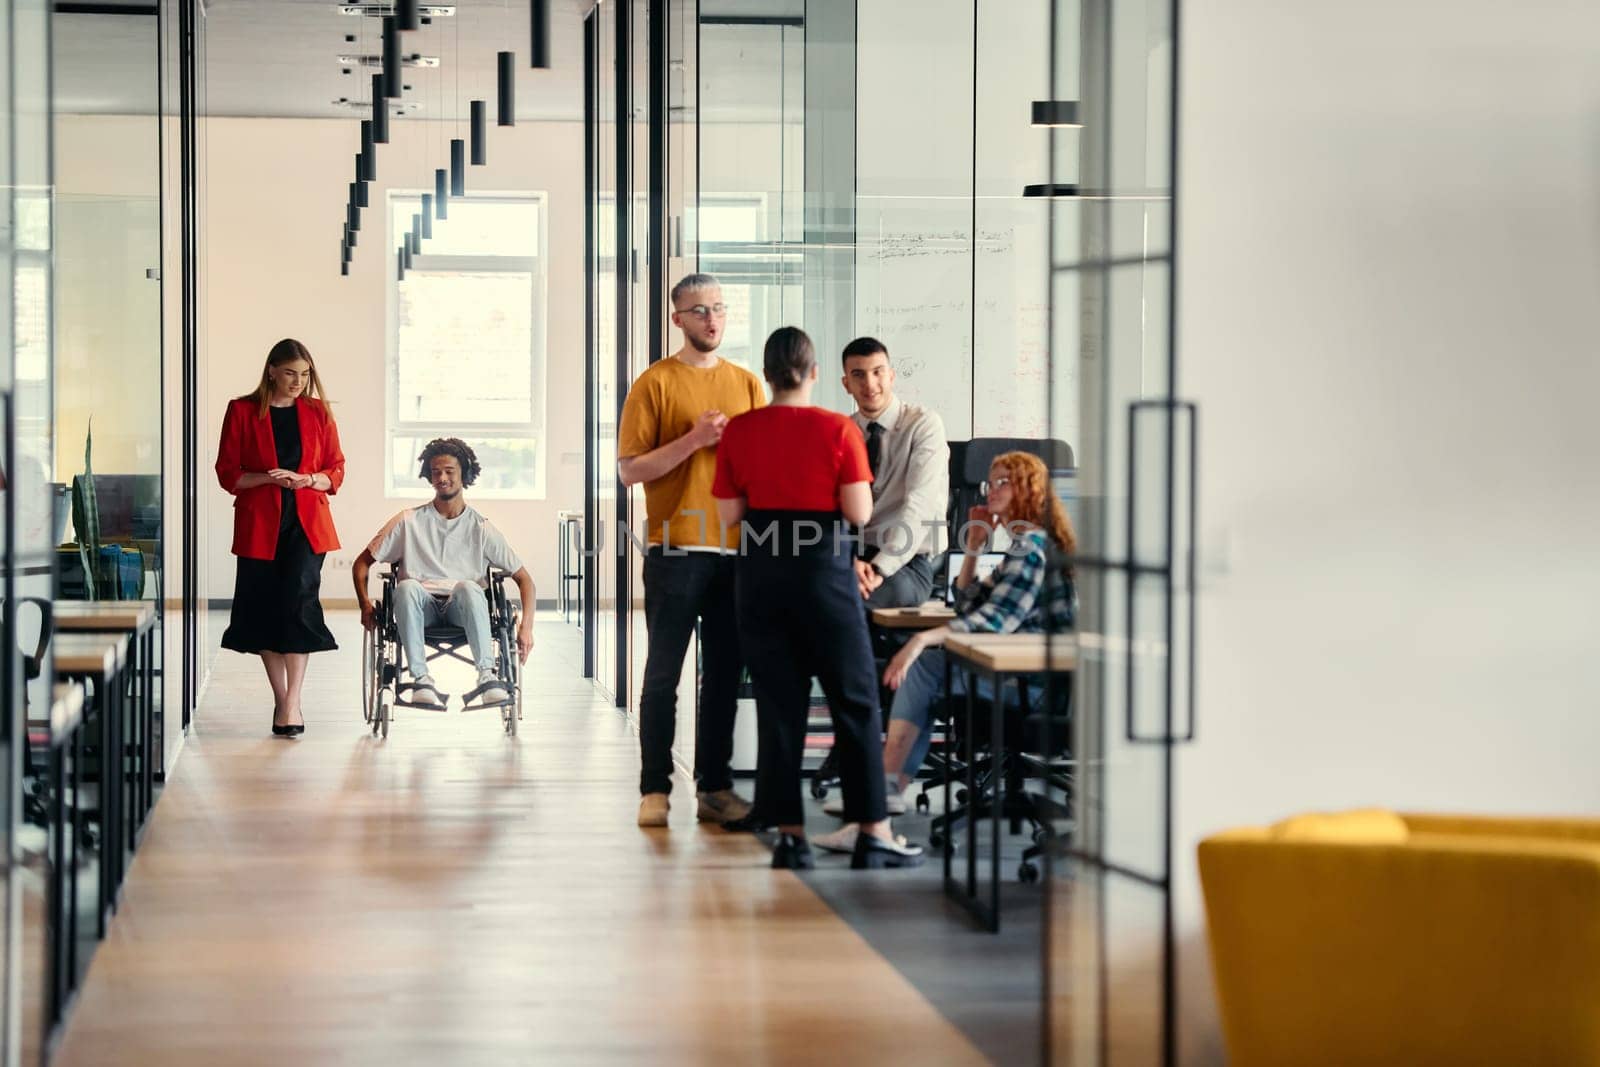 A diverse group of young professionals, including businesswomen and an African-American entrepreneur in a wheelchair, engage in collaborative discussion on various business projects in a modern startup office setting. by dotshock